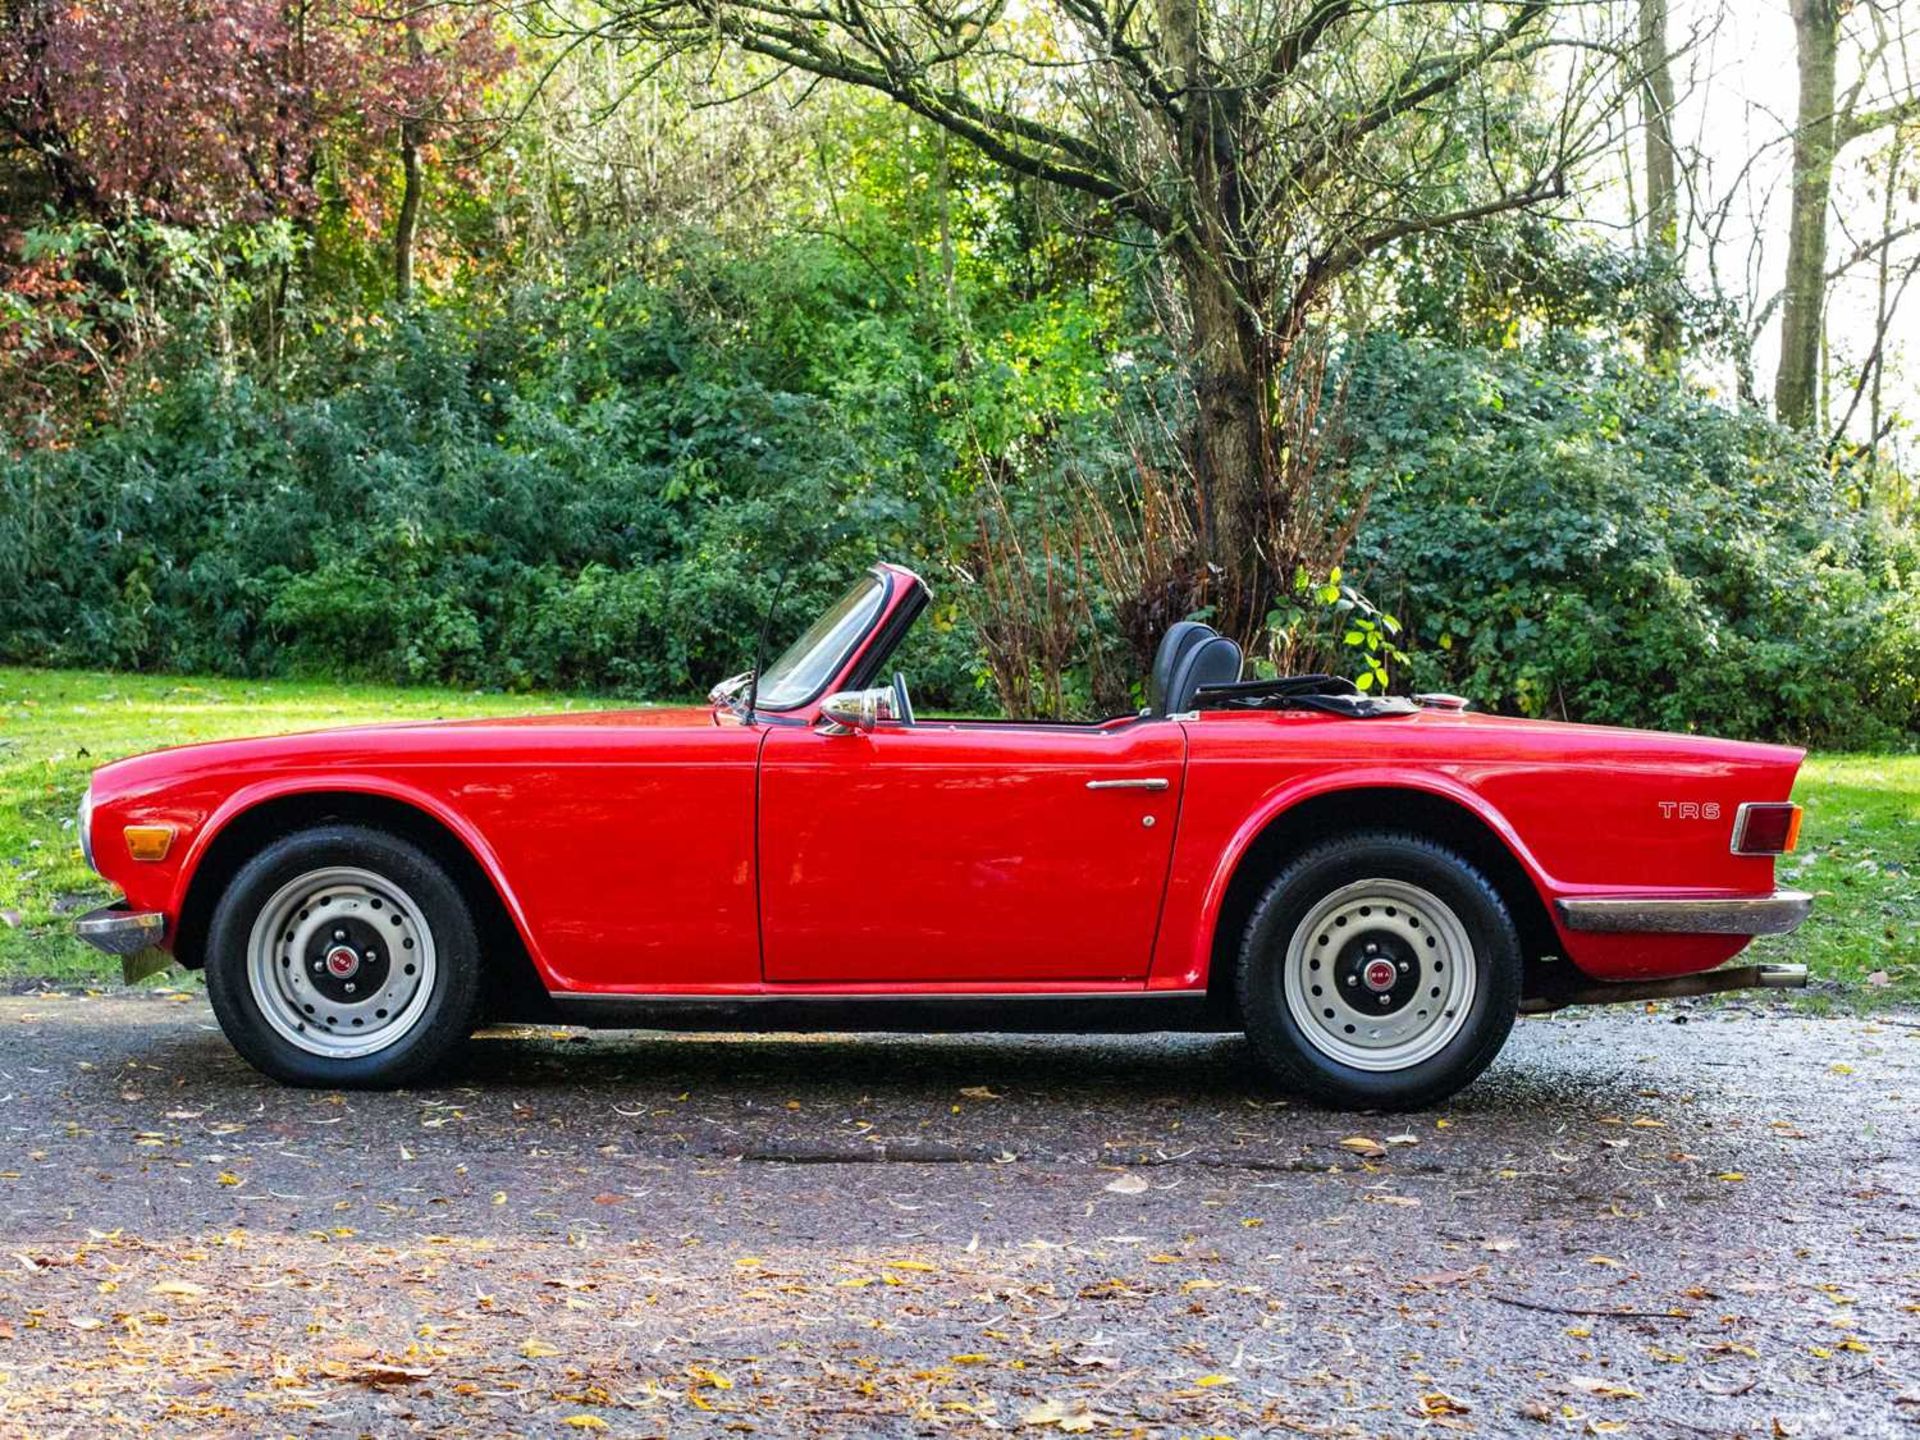 1969 Triumph TR6 Repatriated in 2020, converted to RHD and equipped with UK-specification SU carbure - Image 6 of 53